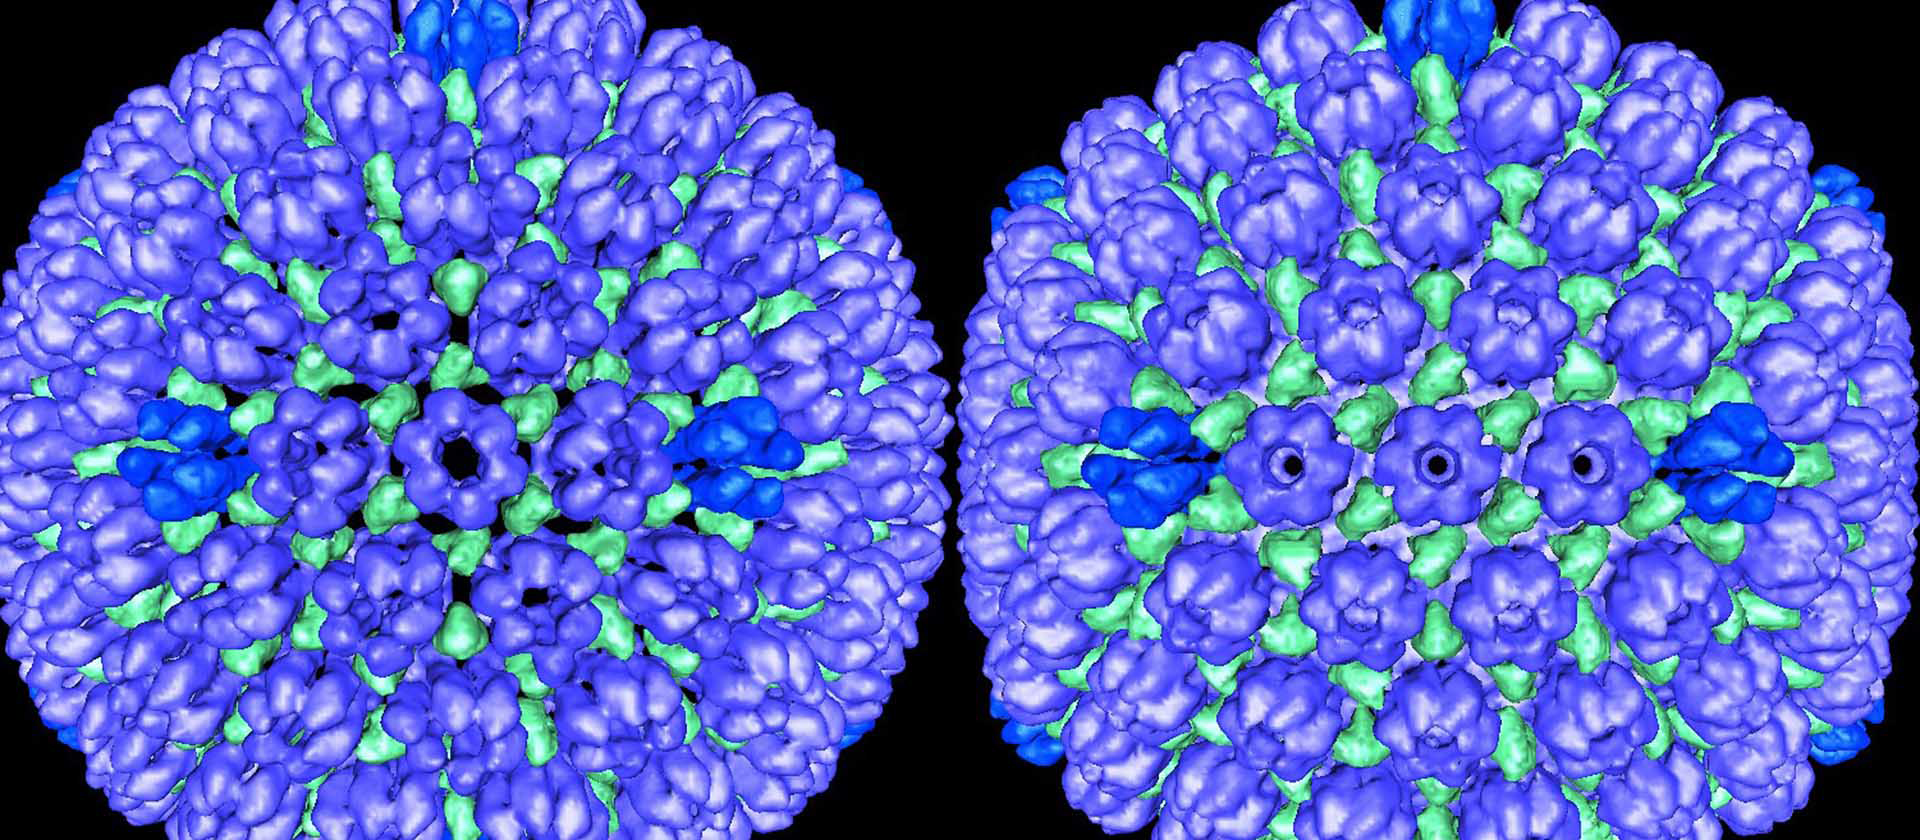 images of procapsid and mature version of herpes simplex virus